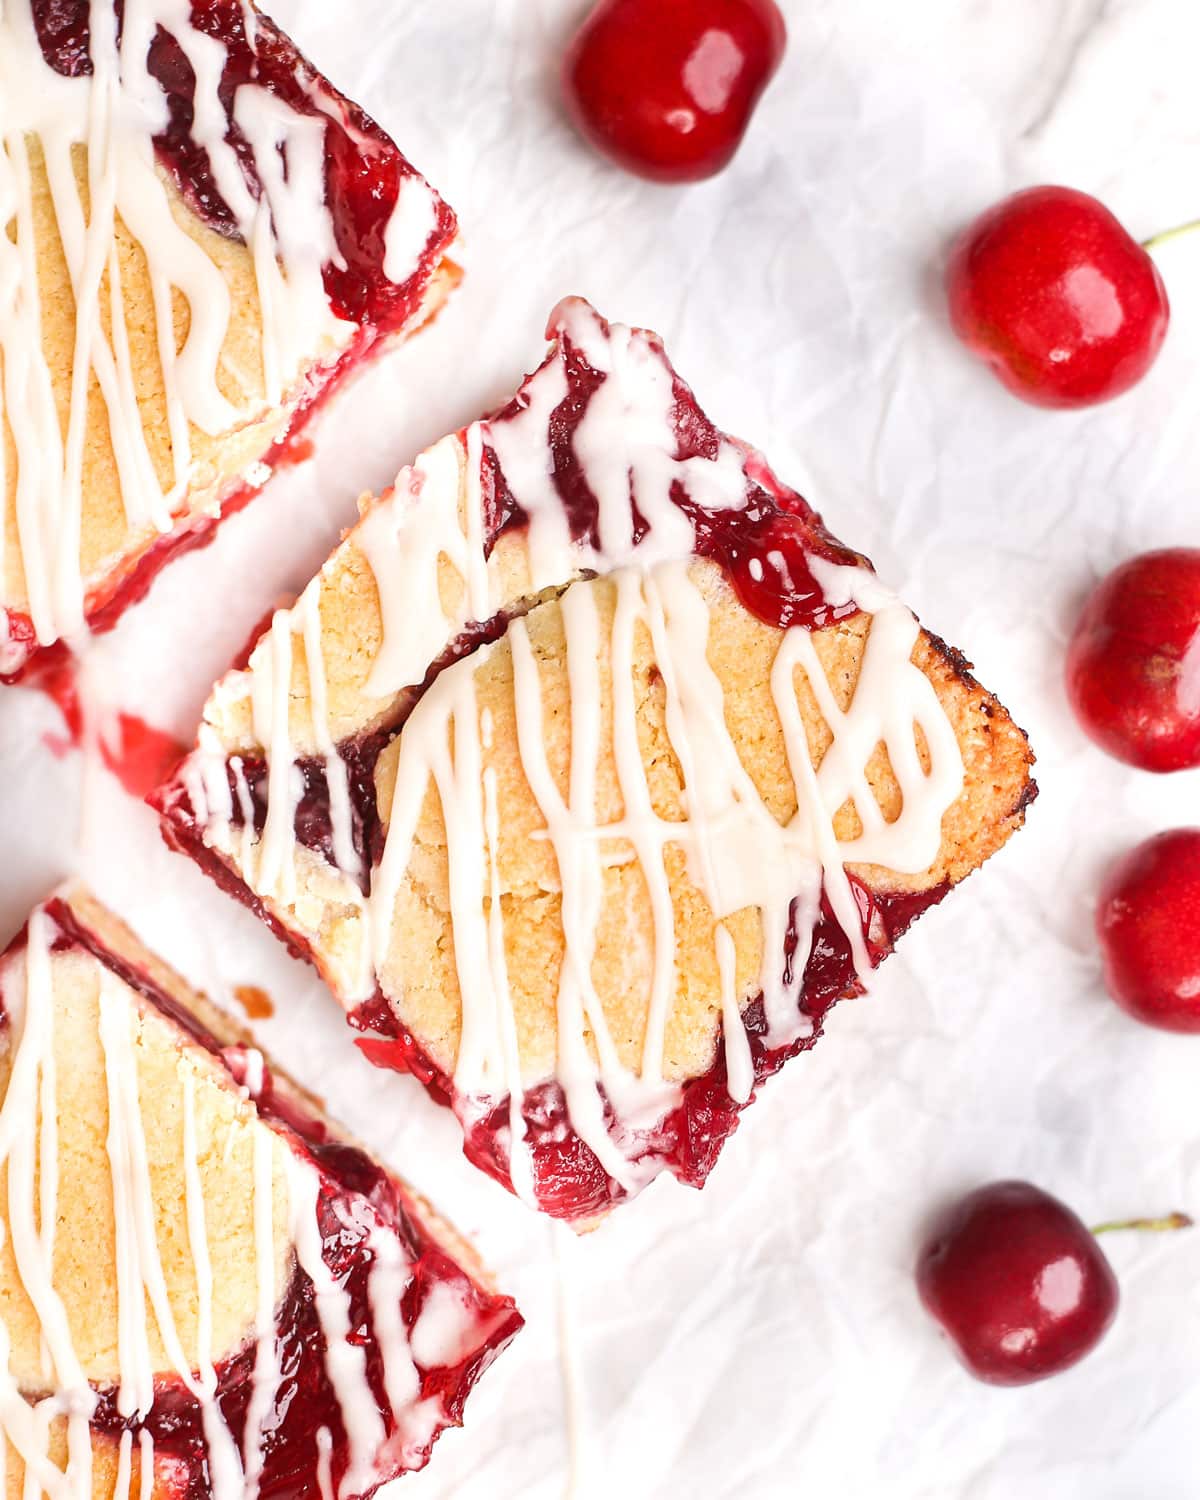 homemade cherry pie bar surrounded with fresh cherries and drizzled with glaze